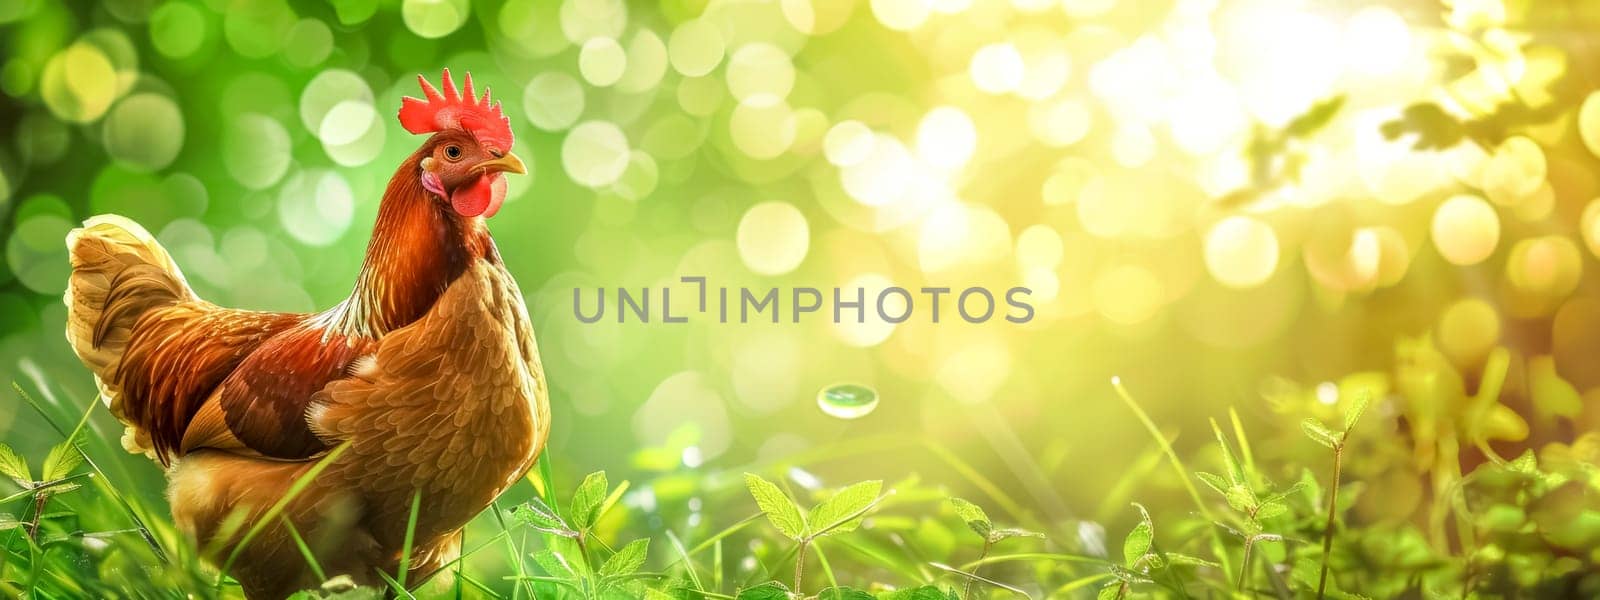 Vibrant rooster stands amidst lush greenery under the golden sunrise